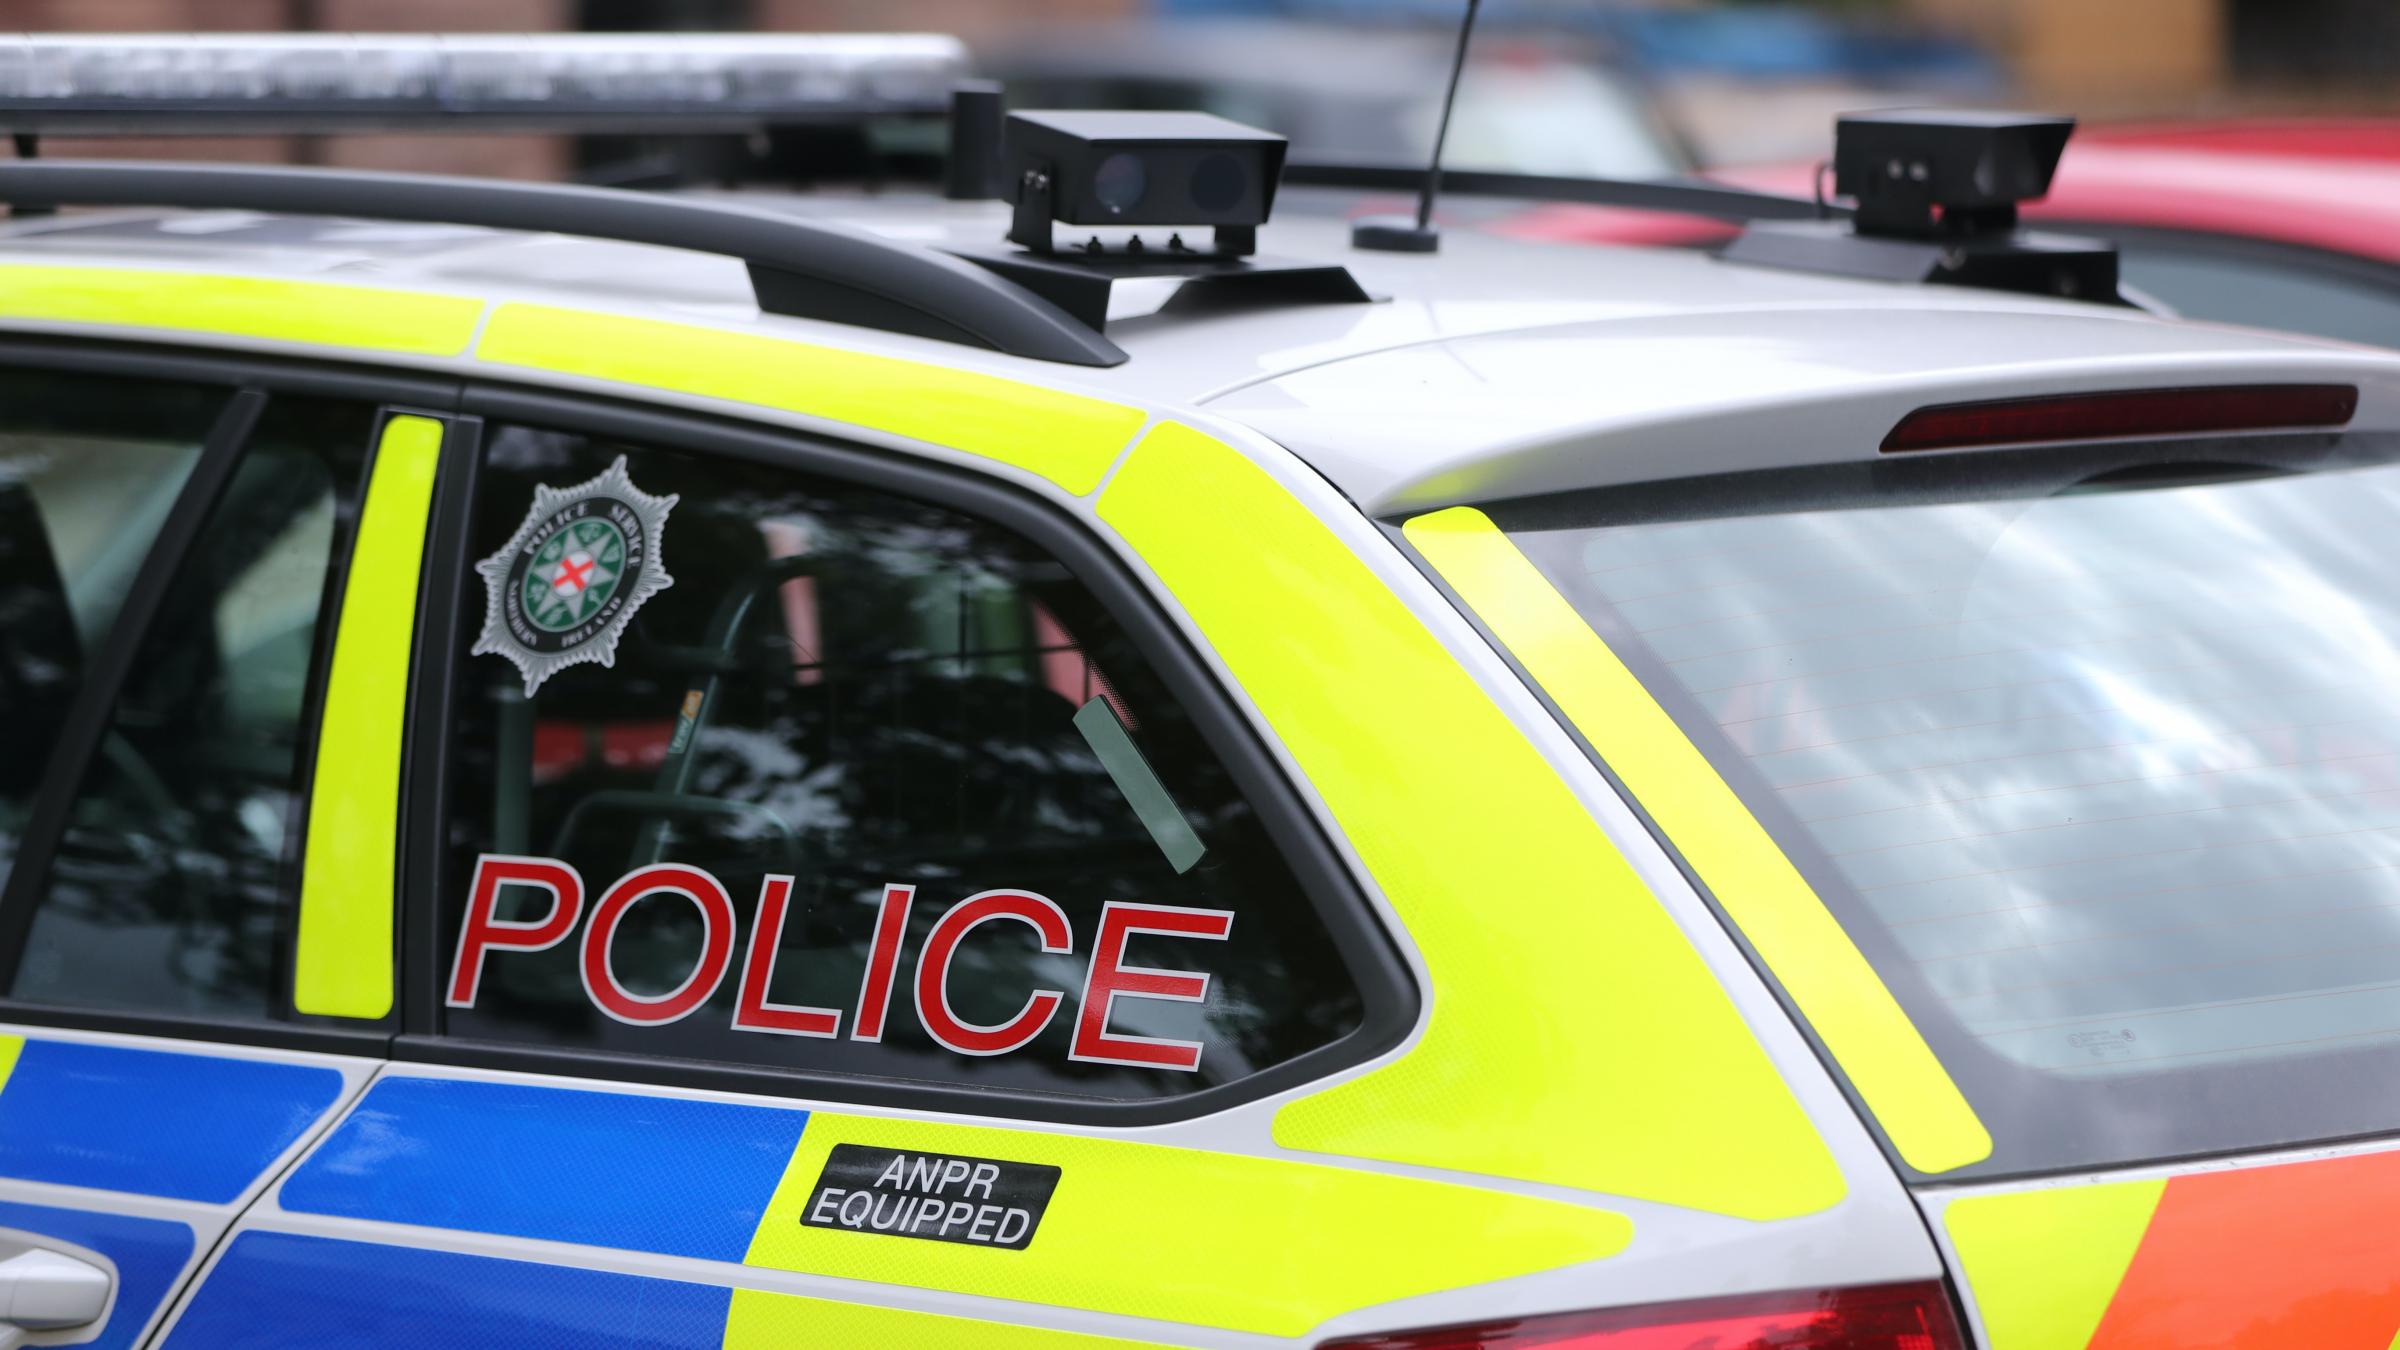 Police in Fermanagh appealing for witnesses following assault